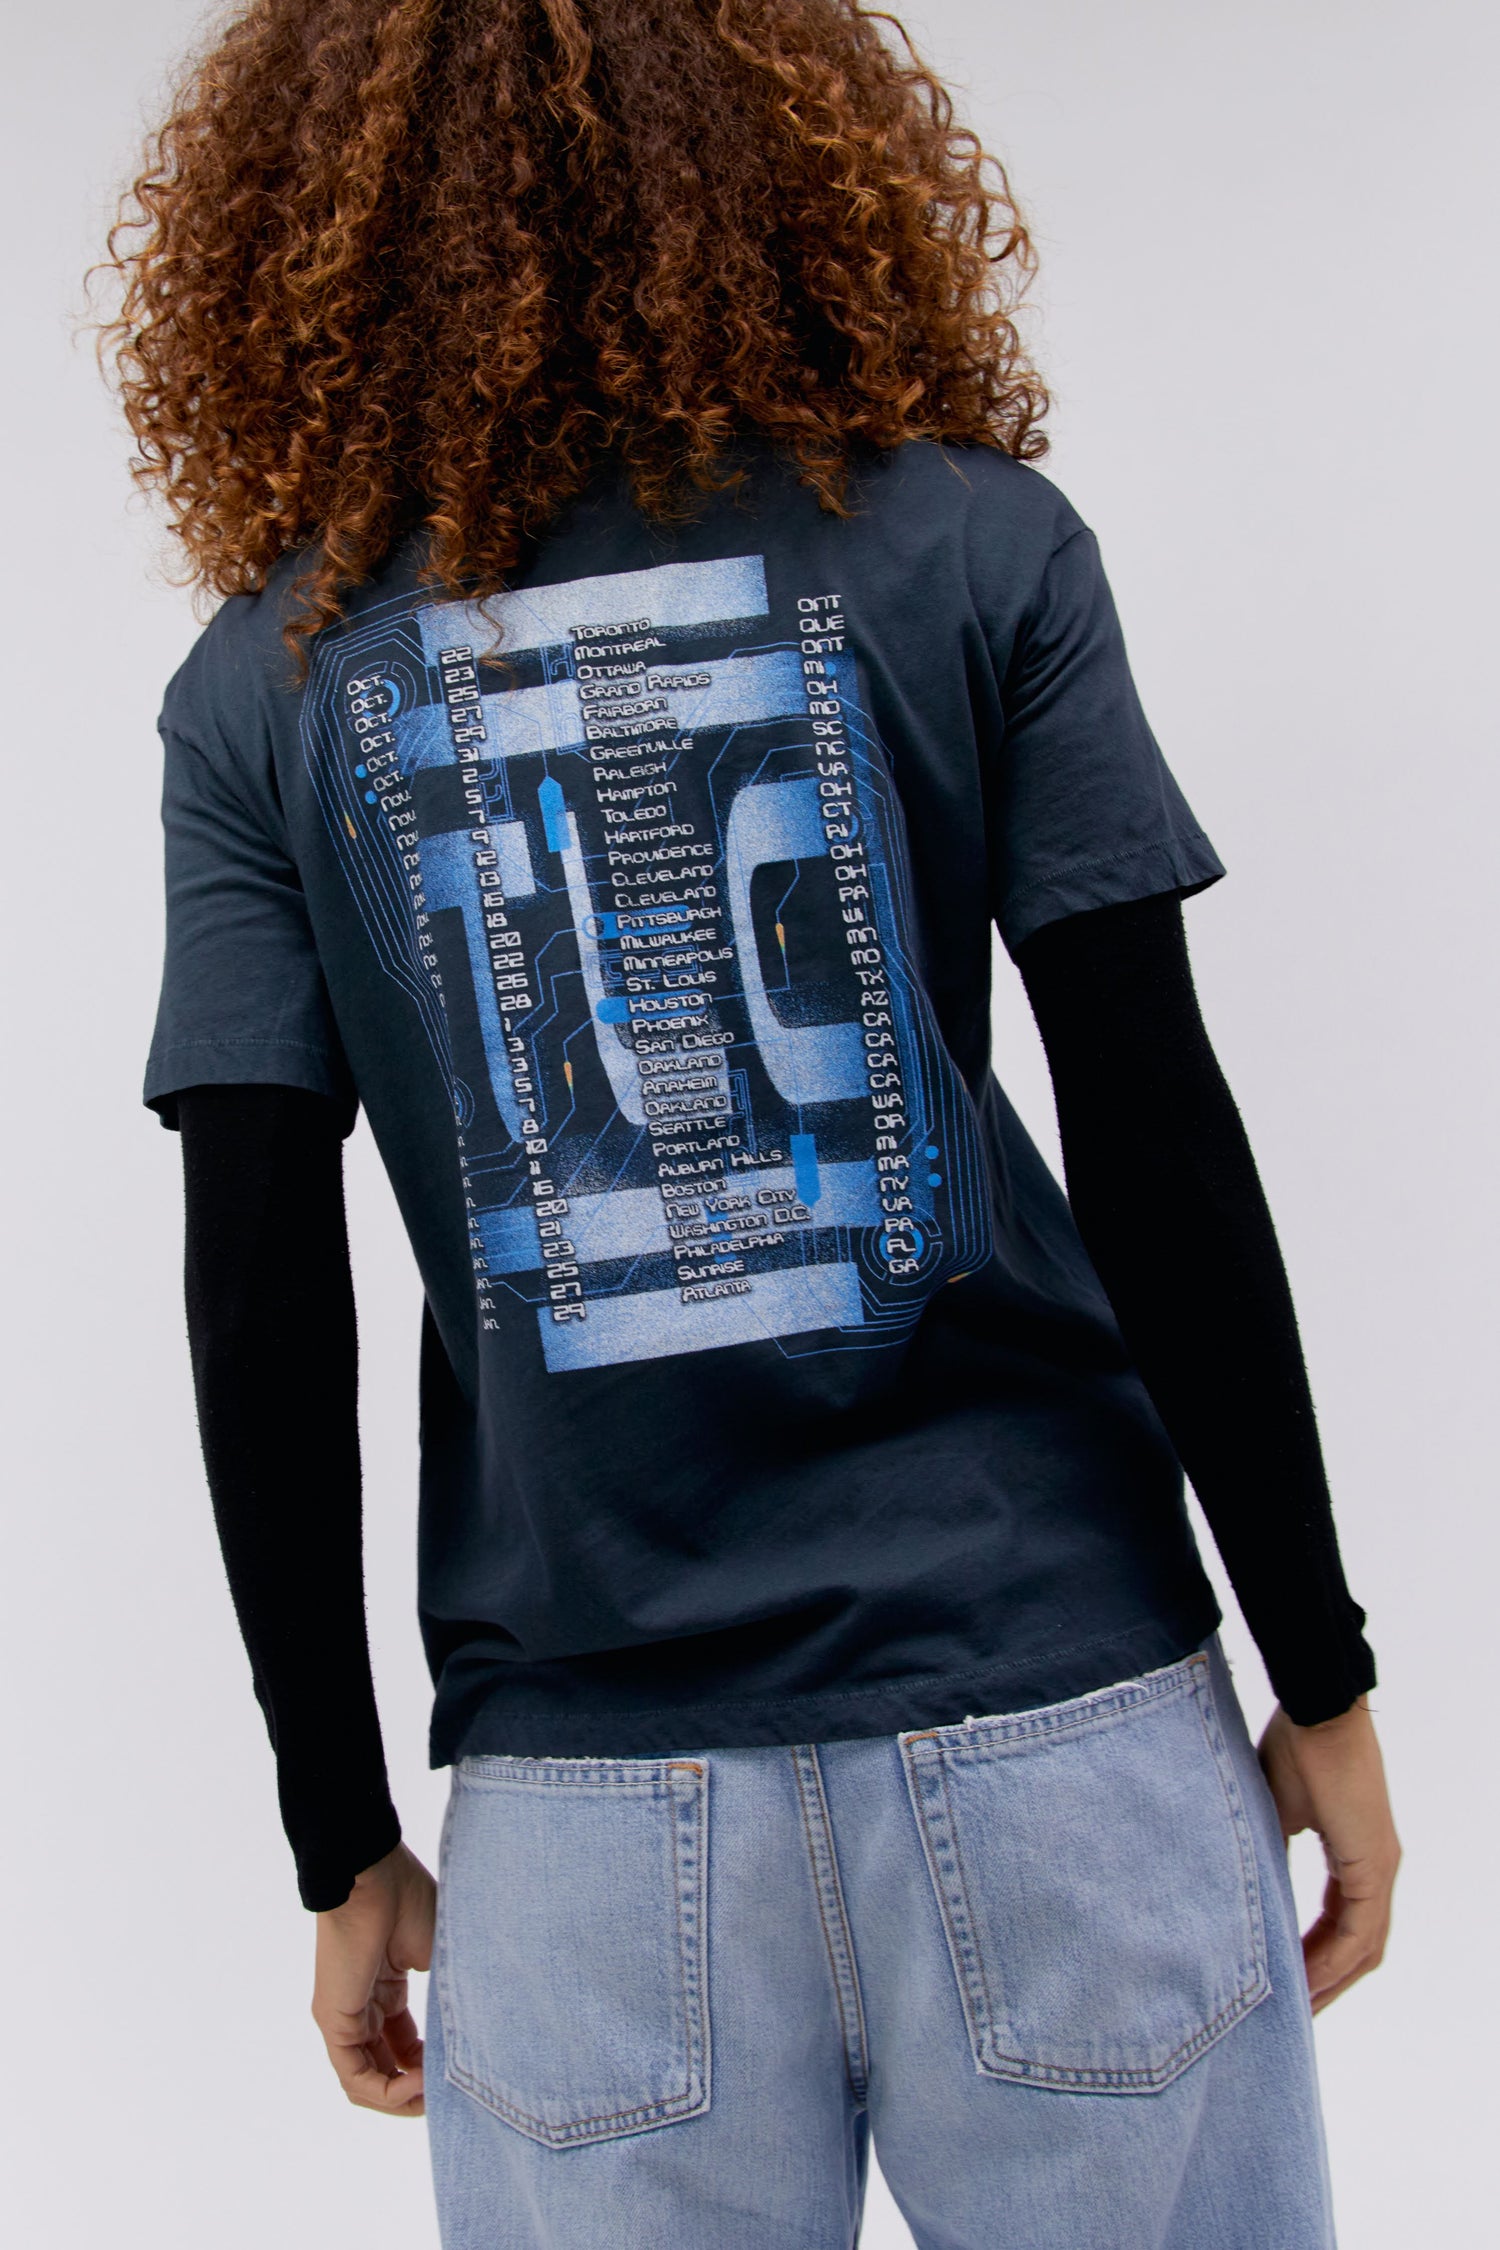 A curly-haired model featuring a black tee designed with a portrait of each member of the group and stamped with 'TLC' at the back.